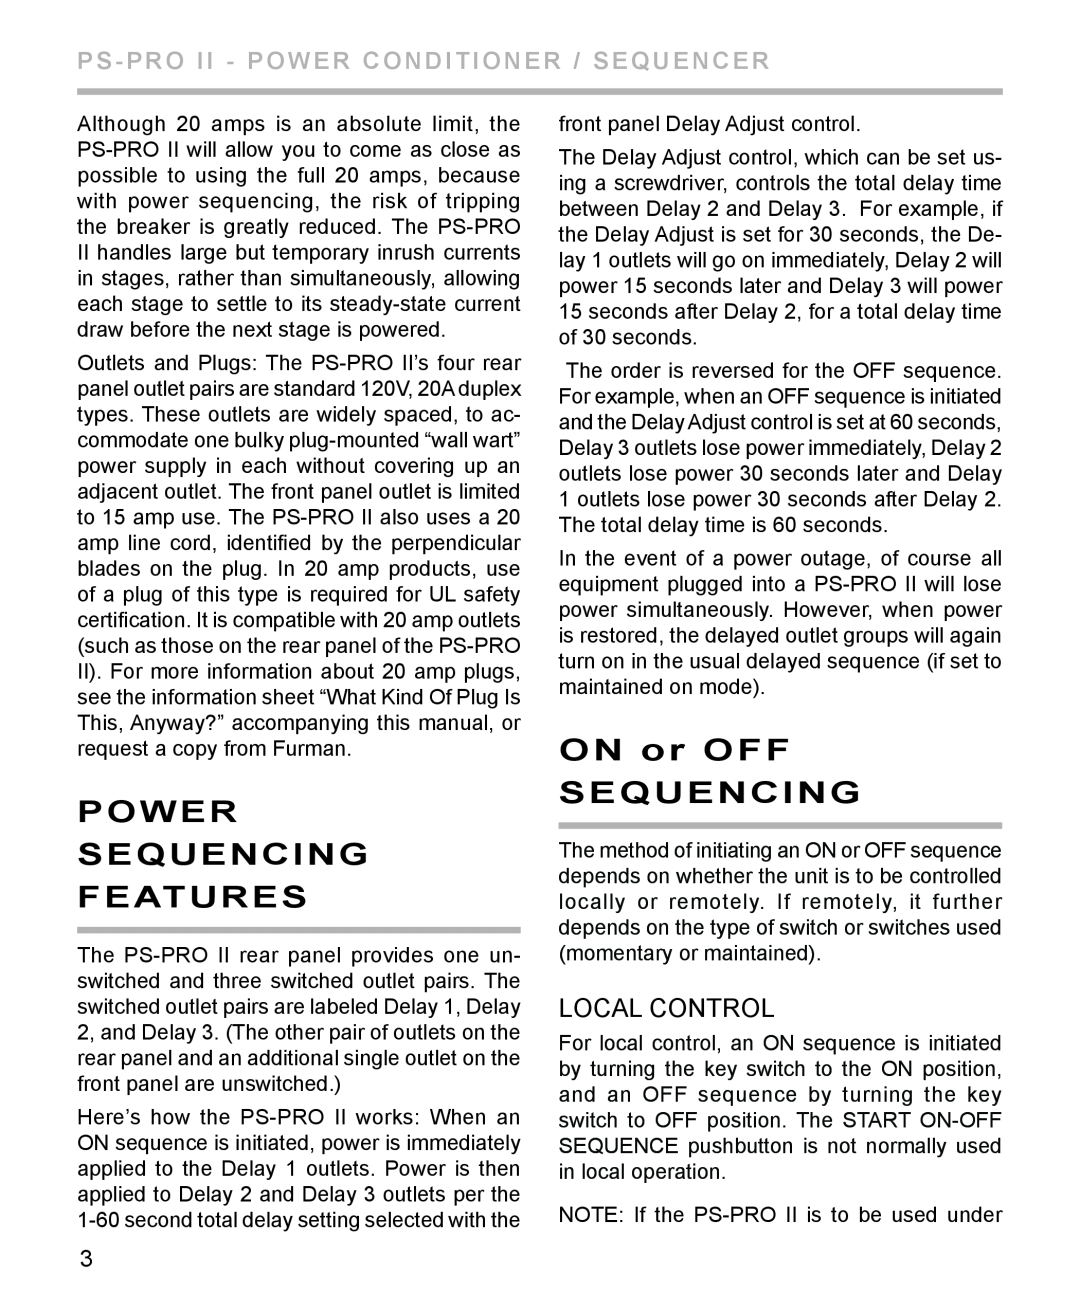 Furman Sound PS-PRO II manual Power Sequencing Features, ON or off sequencing, local control 